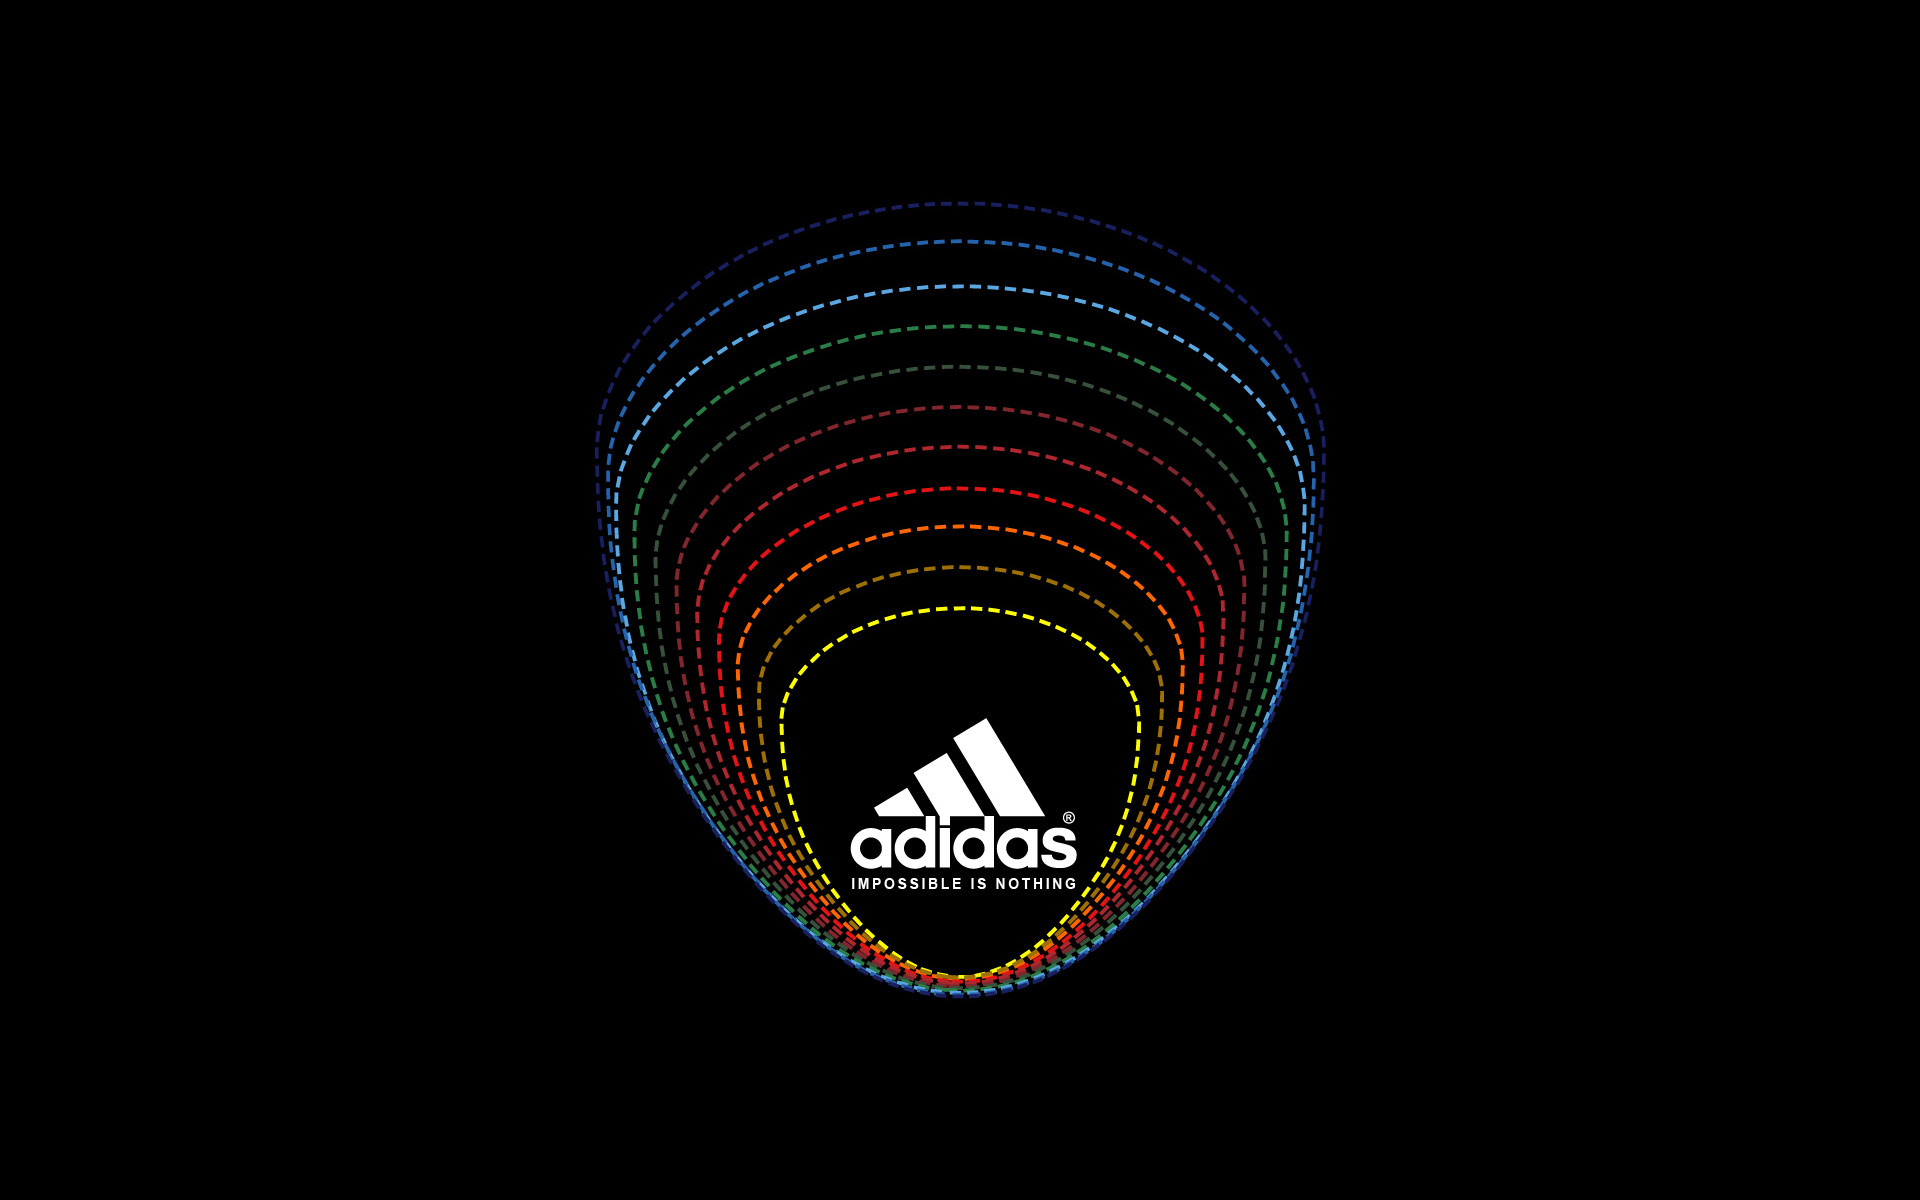 1920x1200 Adidas Impossible Is Nothing HD Wallpaper